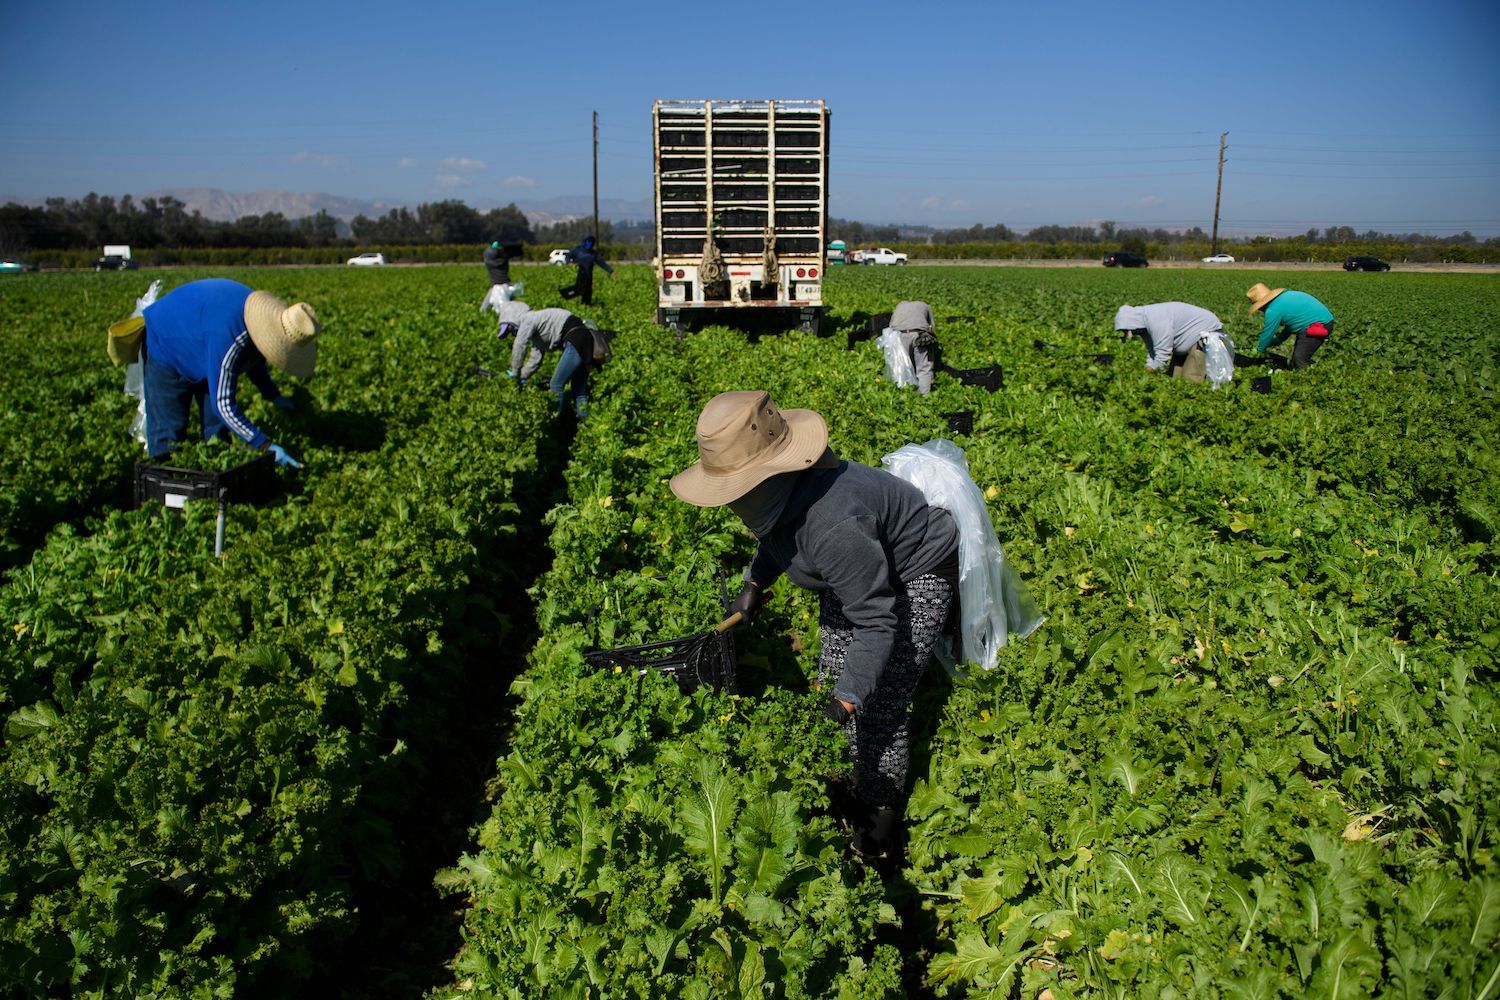 Farmworkers wear face masks while harvesting curly mustard in a field on February 10, 2021 in Ventura County, California.